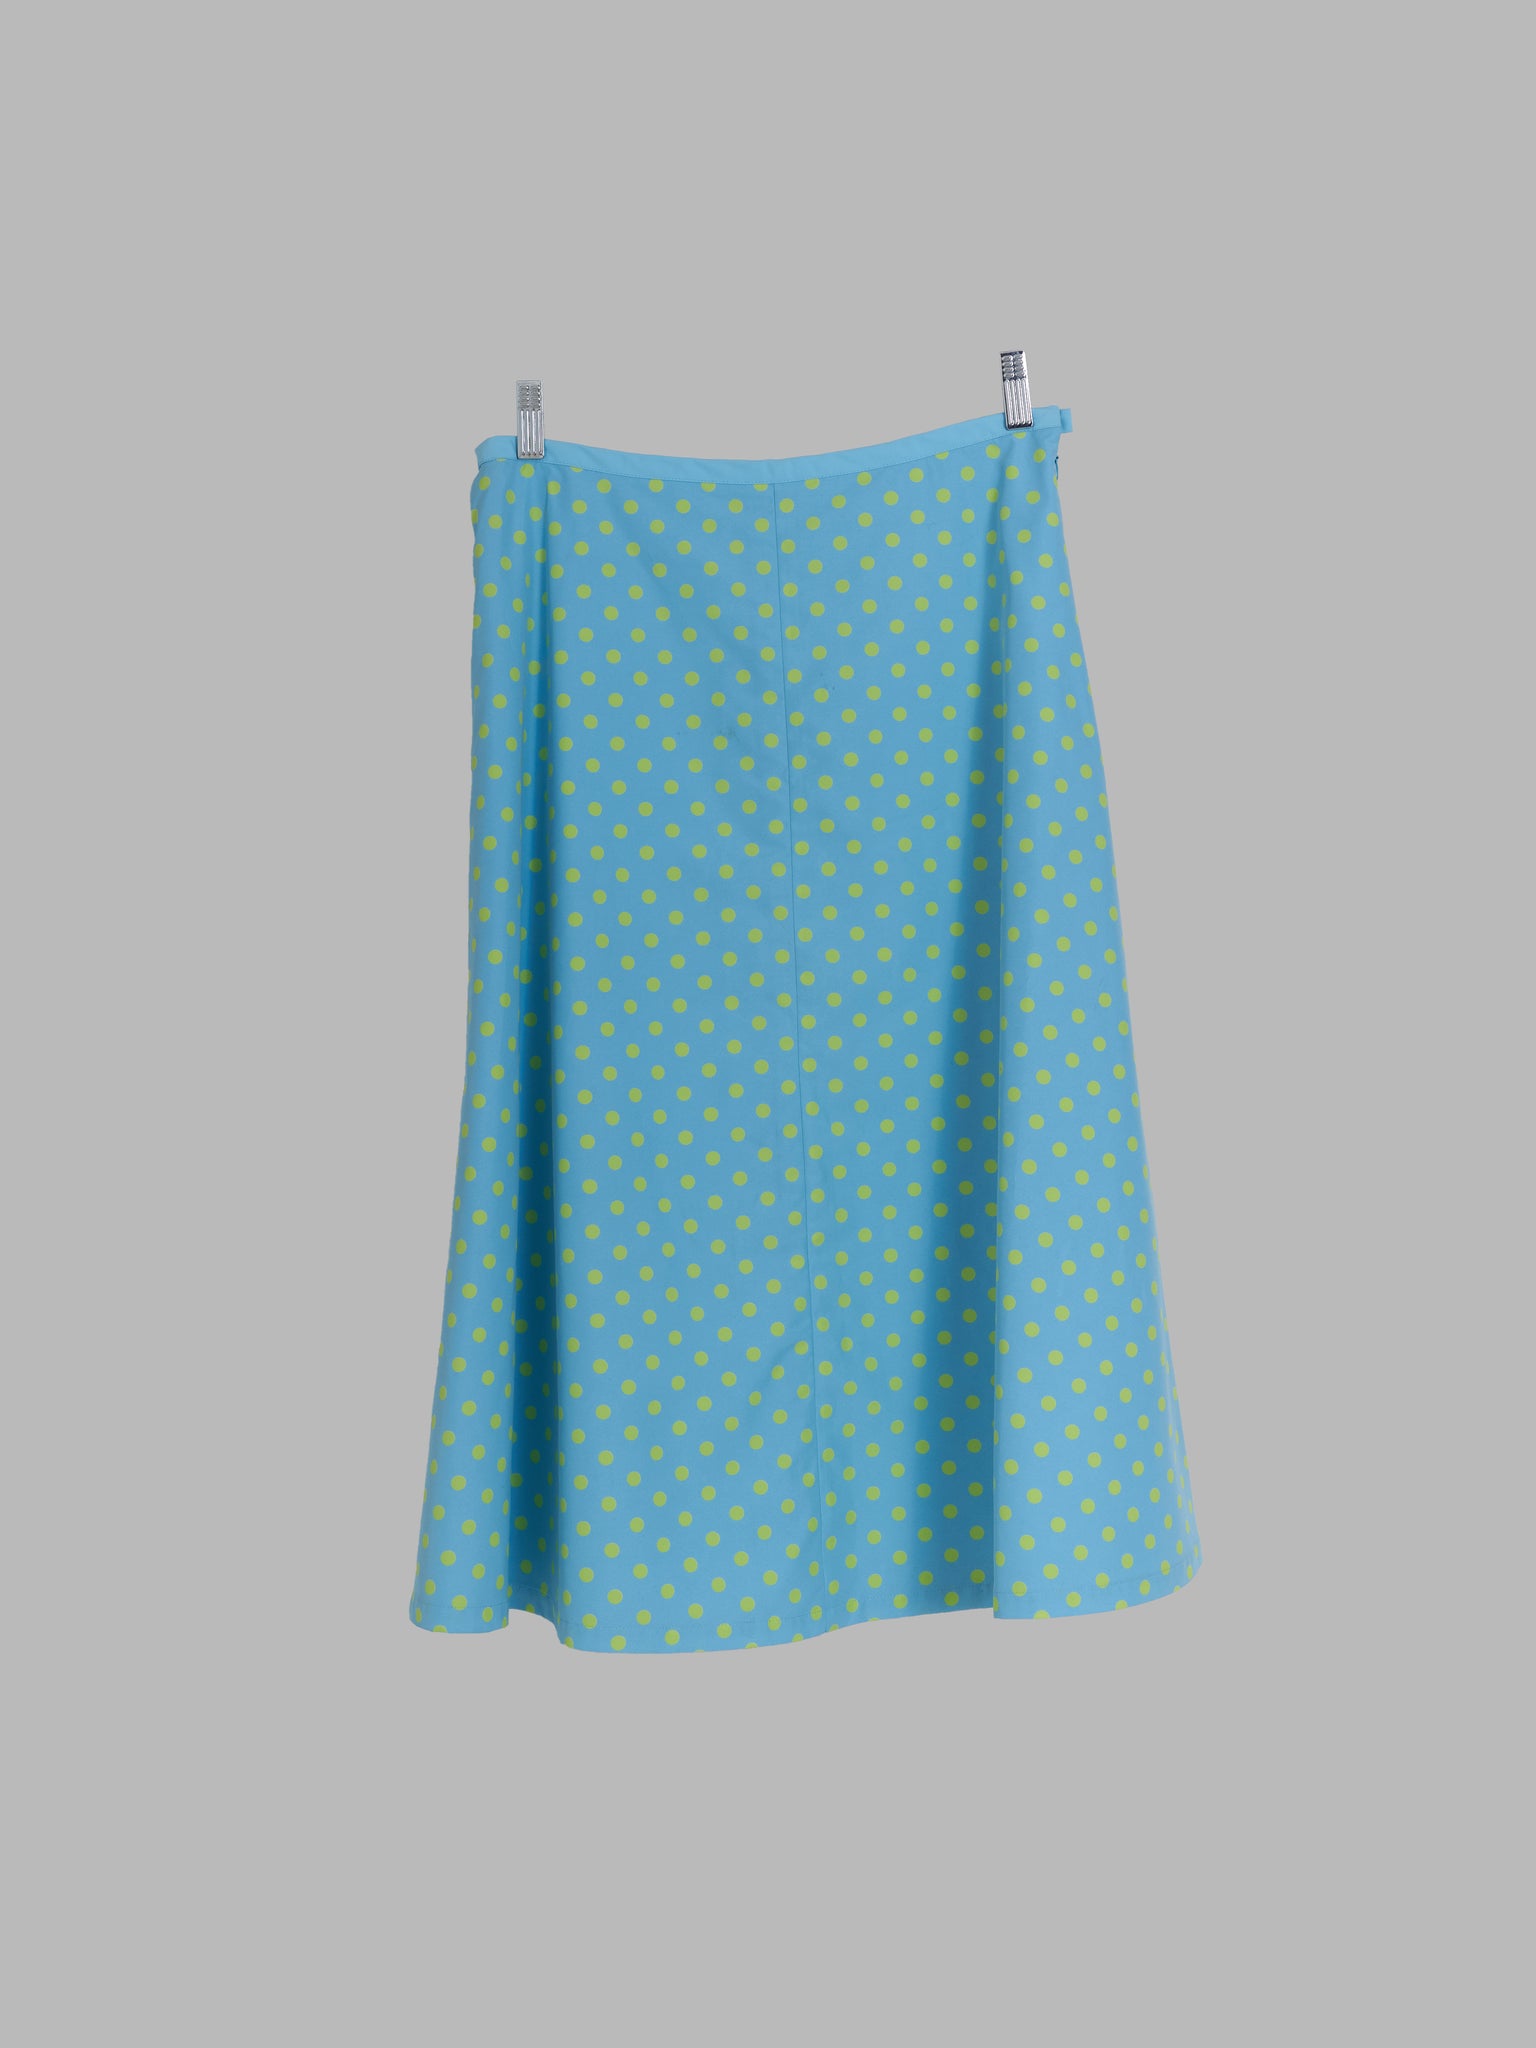 Junya Watanabe Comme des Garcons SS2000 blue poly spotted reversible skirt - M